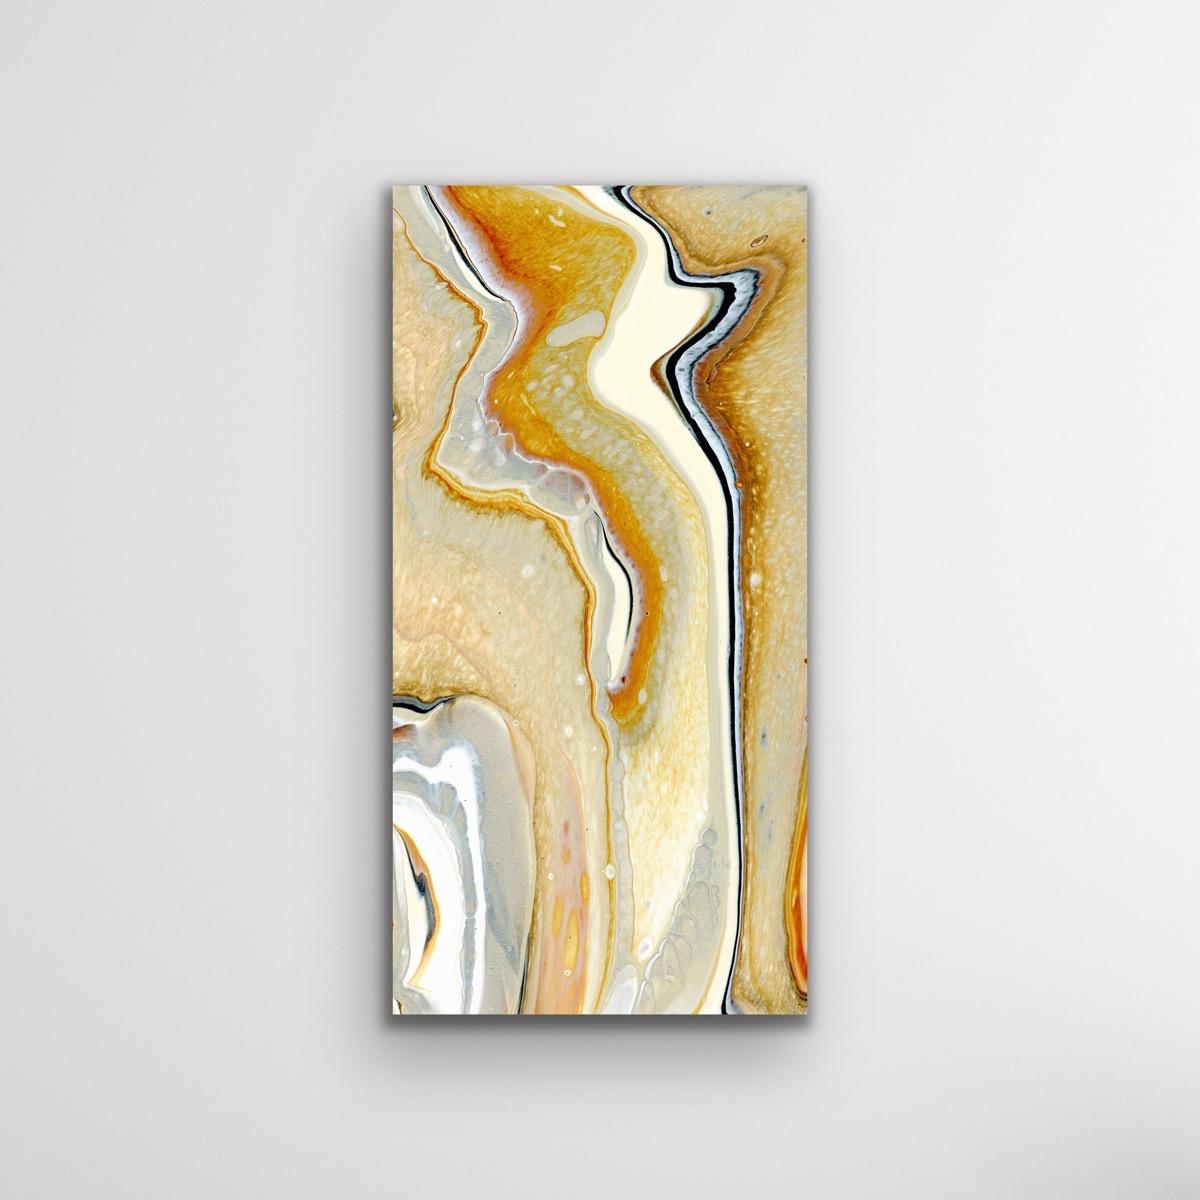 This modern abstract painting is printed on a lightweight metal composite and is suitable for indoor or outdoor decor. This open edition print of Celeste Reiter's original painting is signed by the artist. 

-Title:Molten
-Artist: Celeste